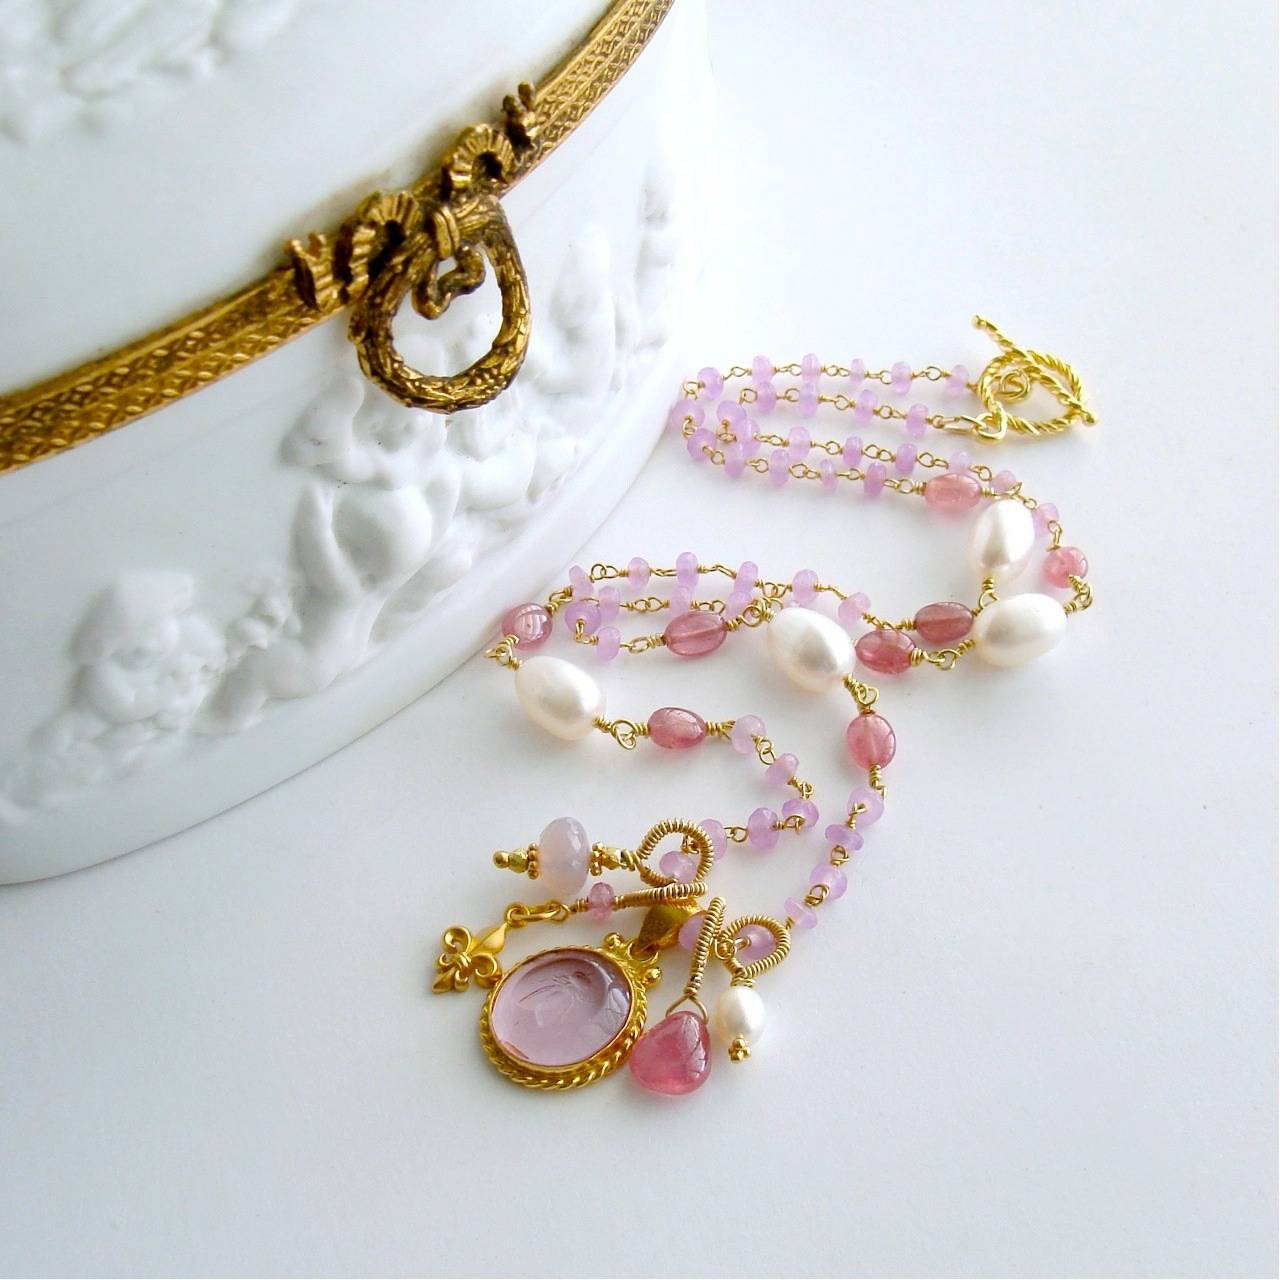 Peu d’Abelle II Necklace.

A dainty gorgeous soft pink Venetian glass intaglio of a Napoleonic bee - becomes the focal point of this classic necklace.  This gorgeous work of art has been married to a delicate necklace of hand-linked orchid